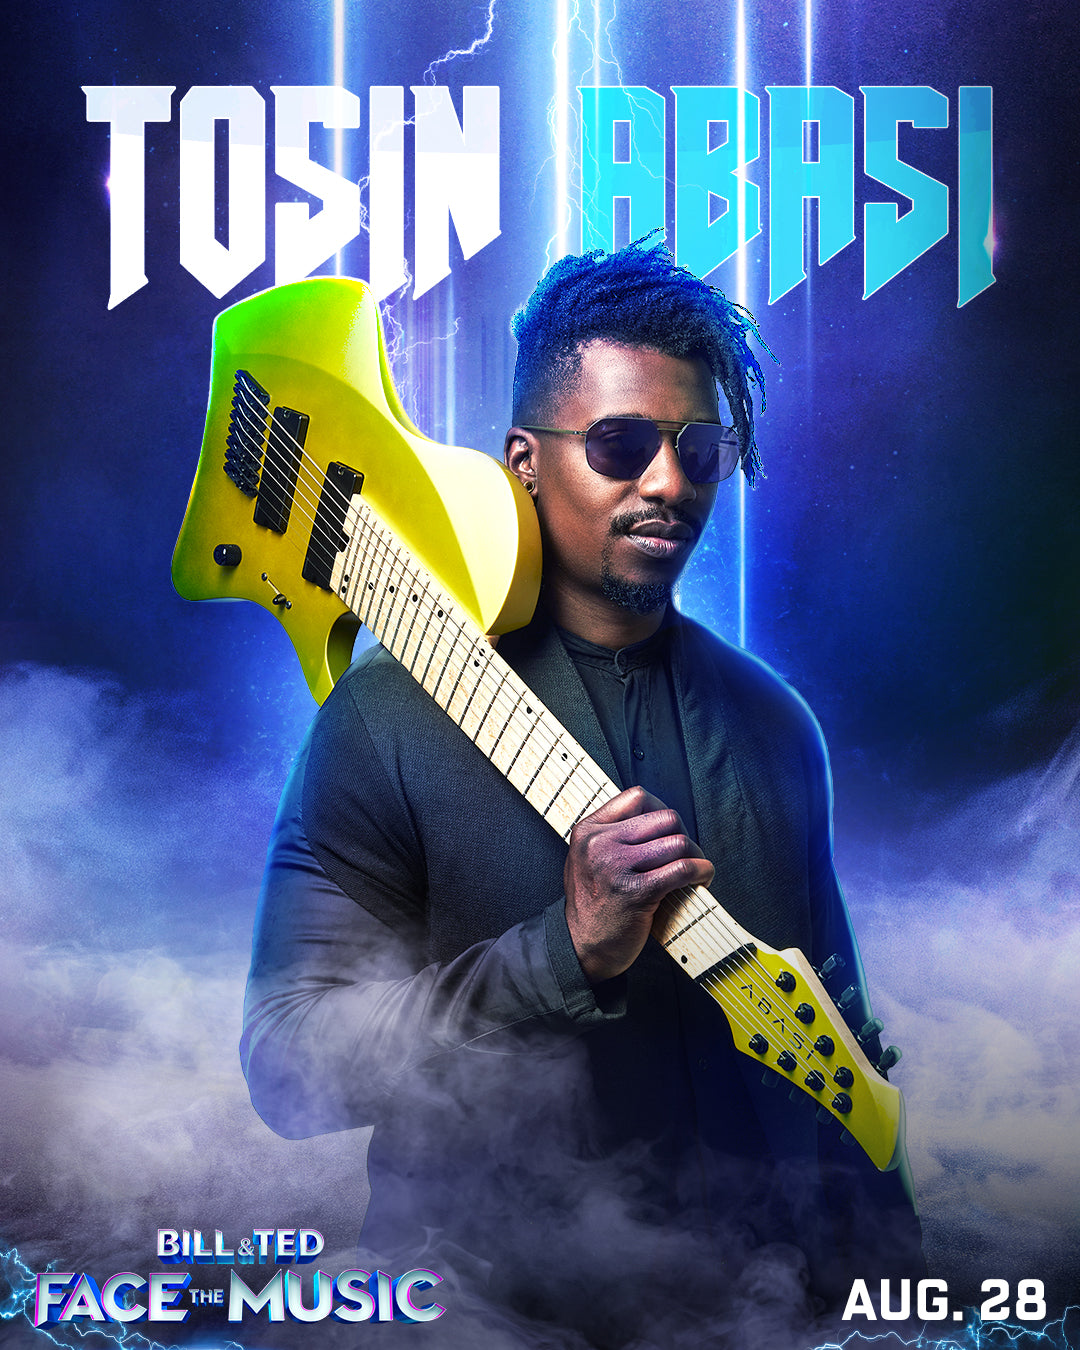 Animals As Leaders' Tosin Abasi revealed as the "Air Shredder" in Bill & Ted Face the Music